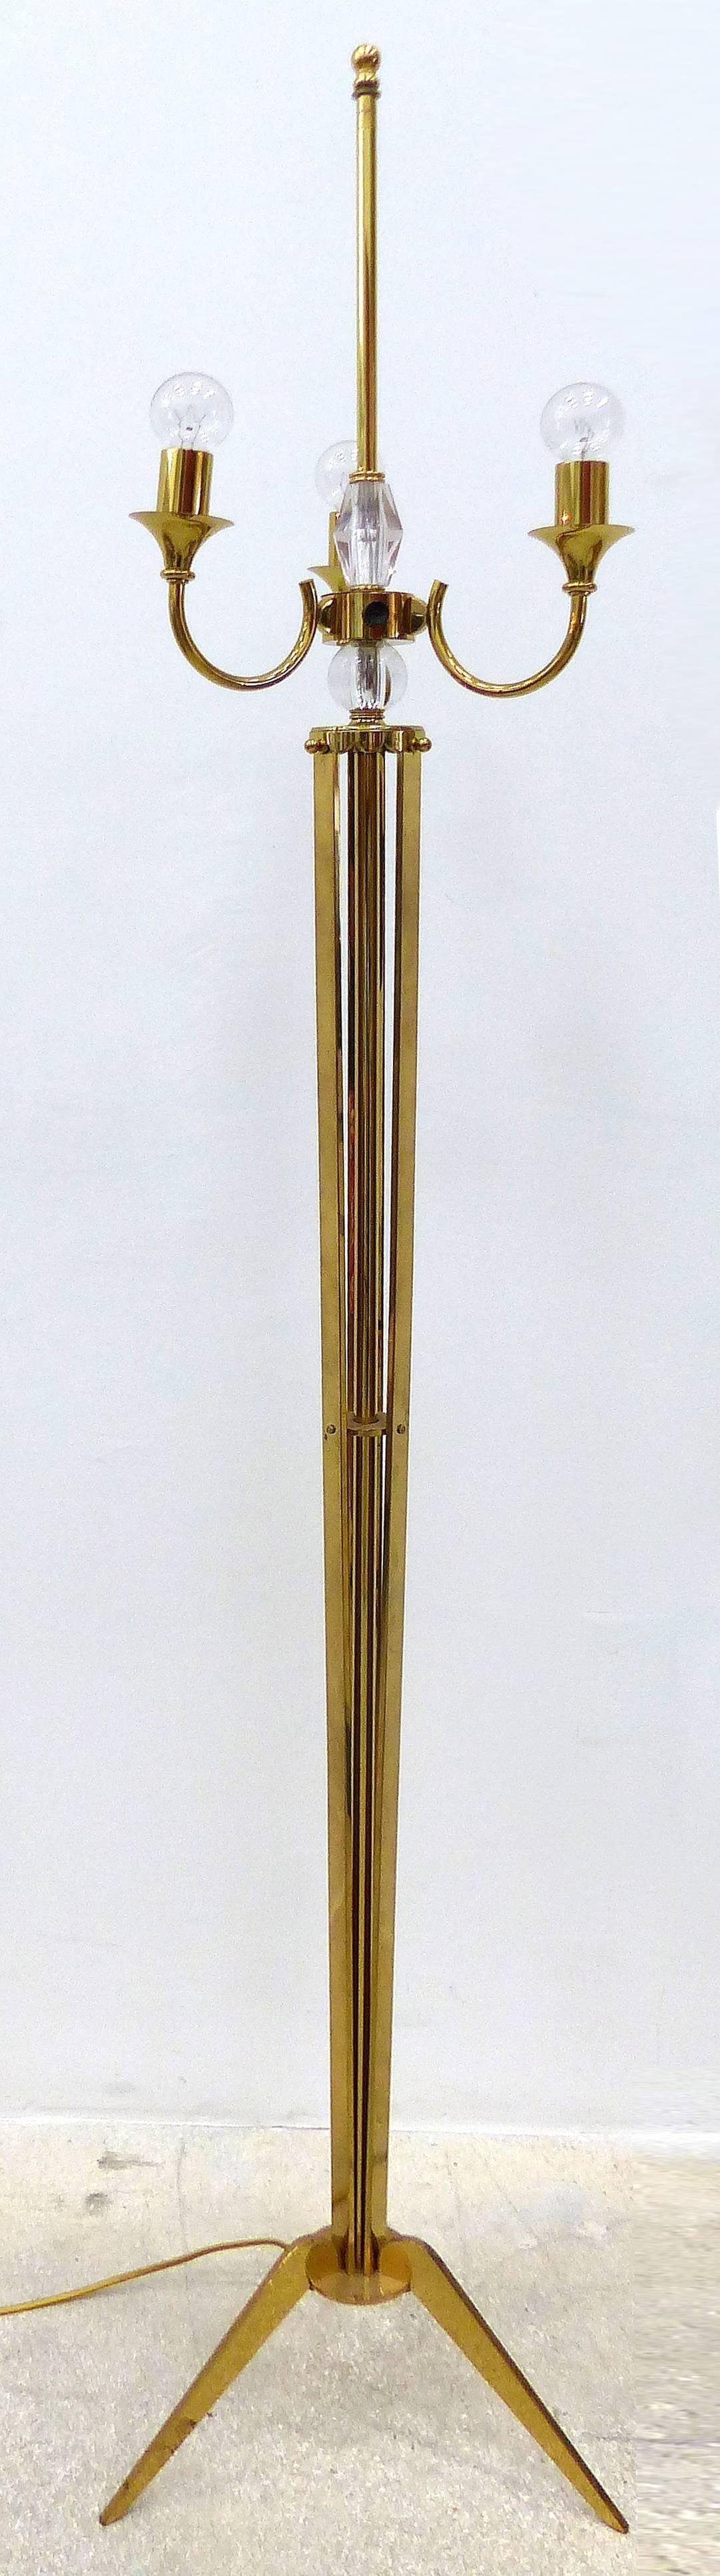 1940s French Brass and Crystal Floor Lamp

A very elegant French Art Deco floor lamp is from the 1940's. Highly polished brass and gleaming crystal make a statement for any home. The lamp sits on a tripod base with a central shaft flanked by three